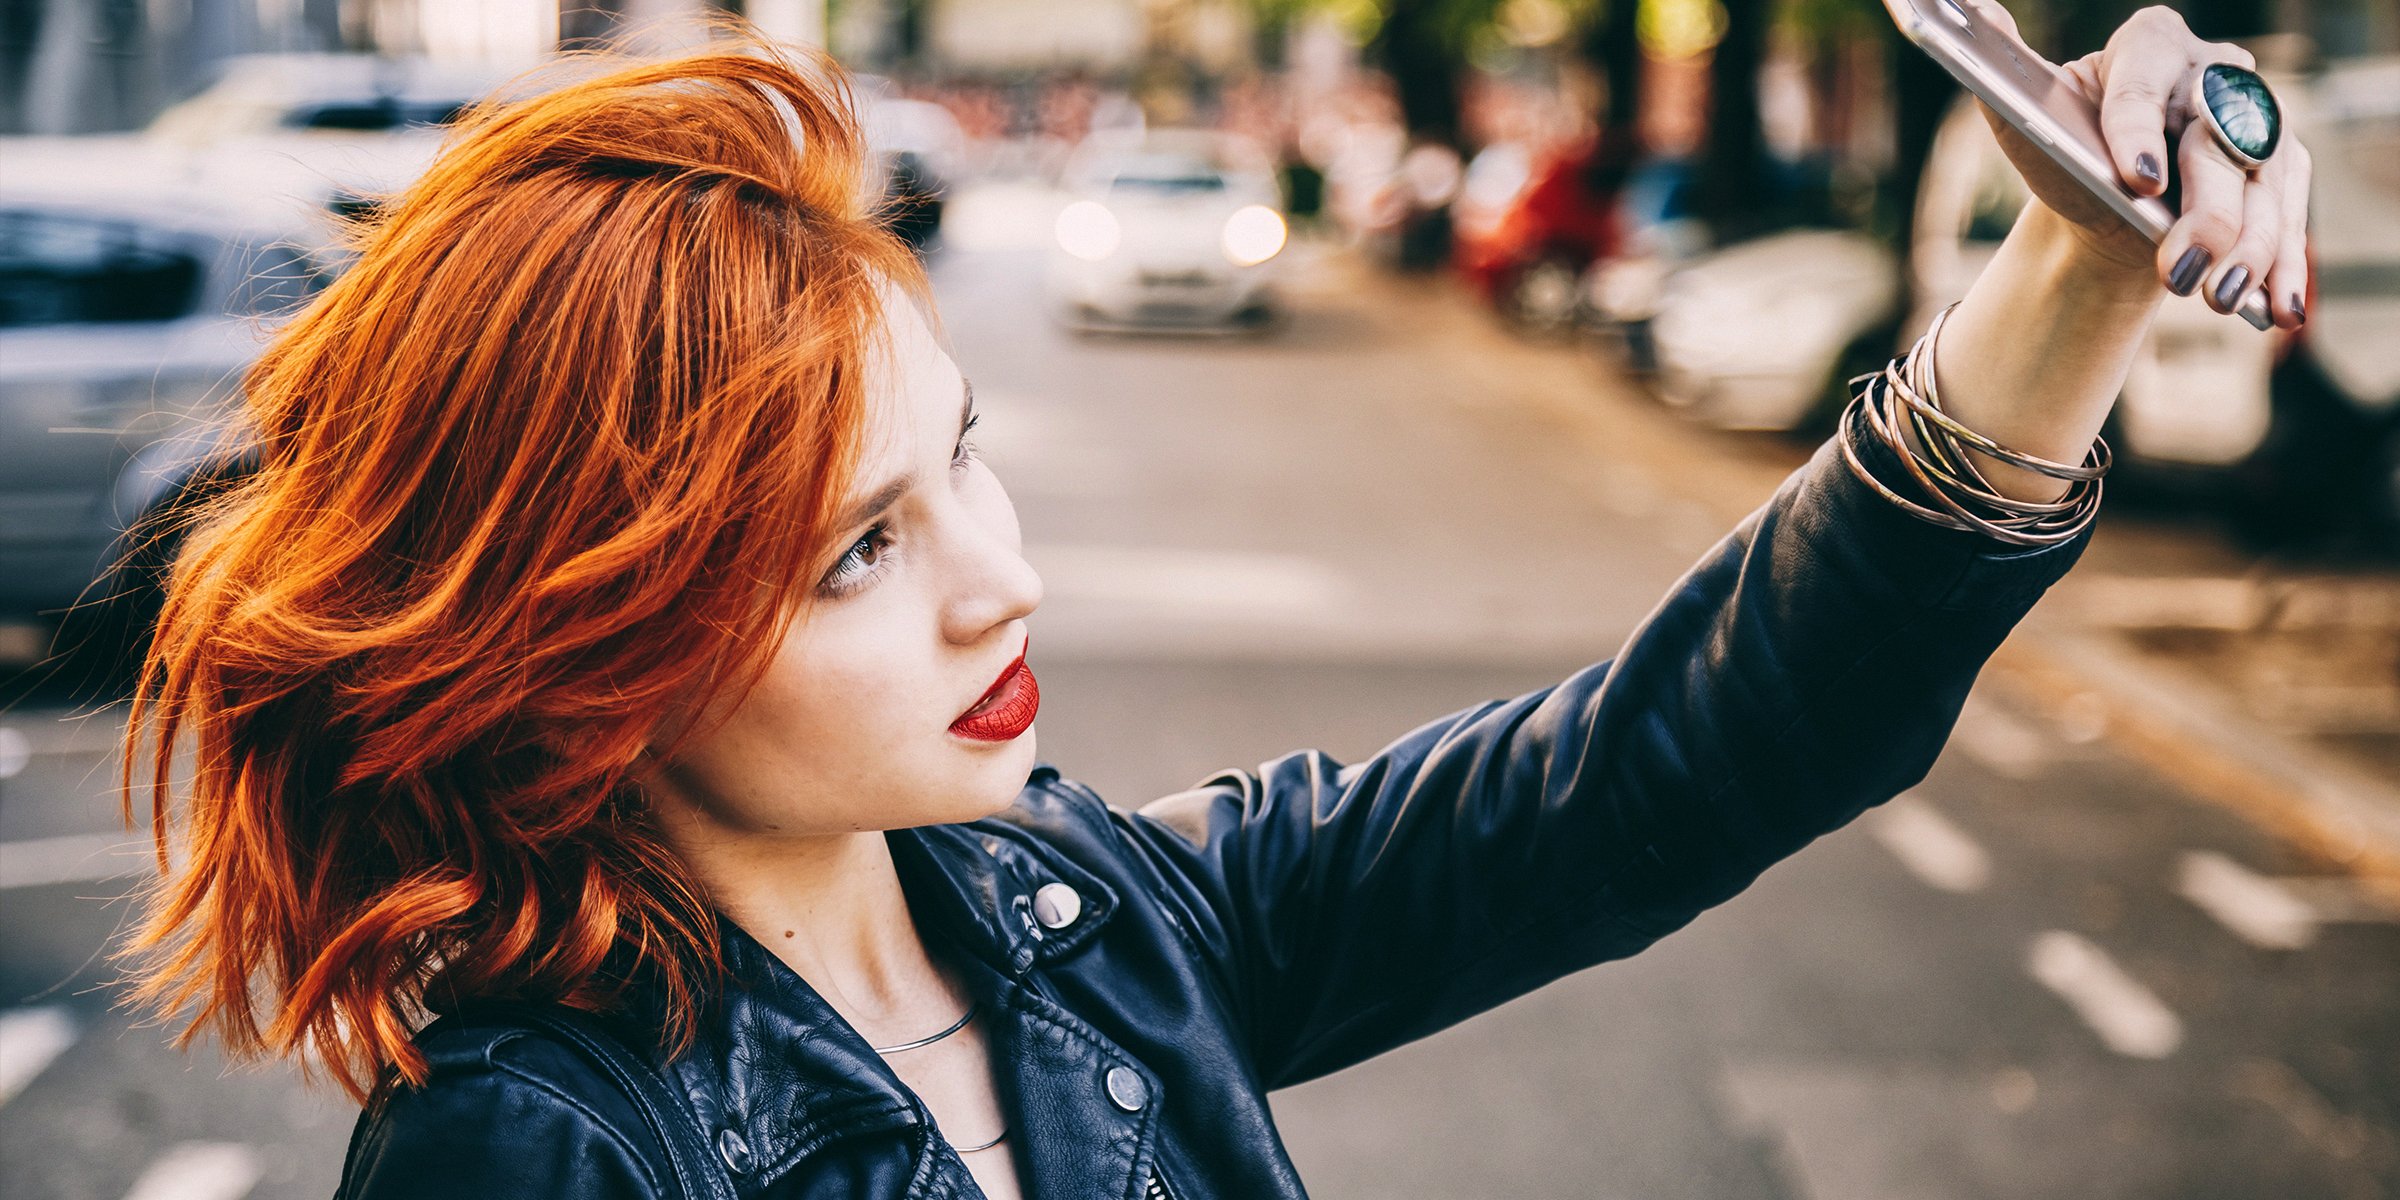 A Woman with Copper-Colored Hair Is Pictured Taking a Selfie | Source: Shutterstock